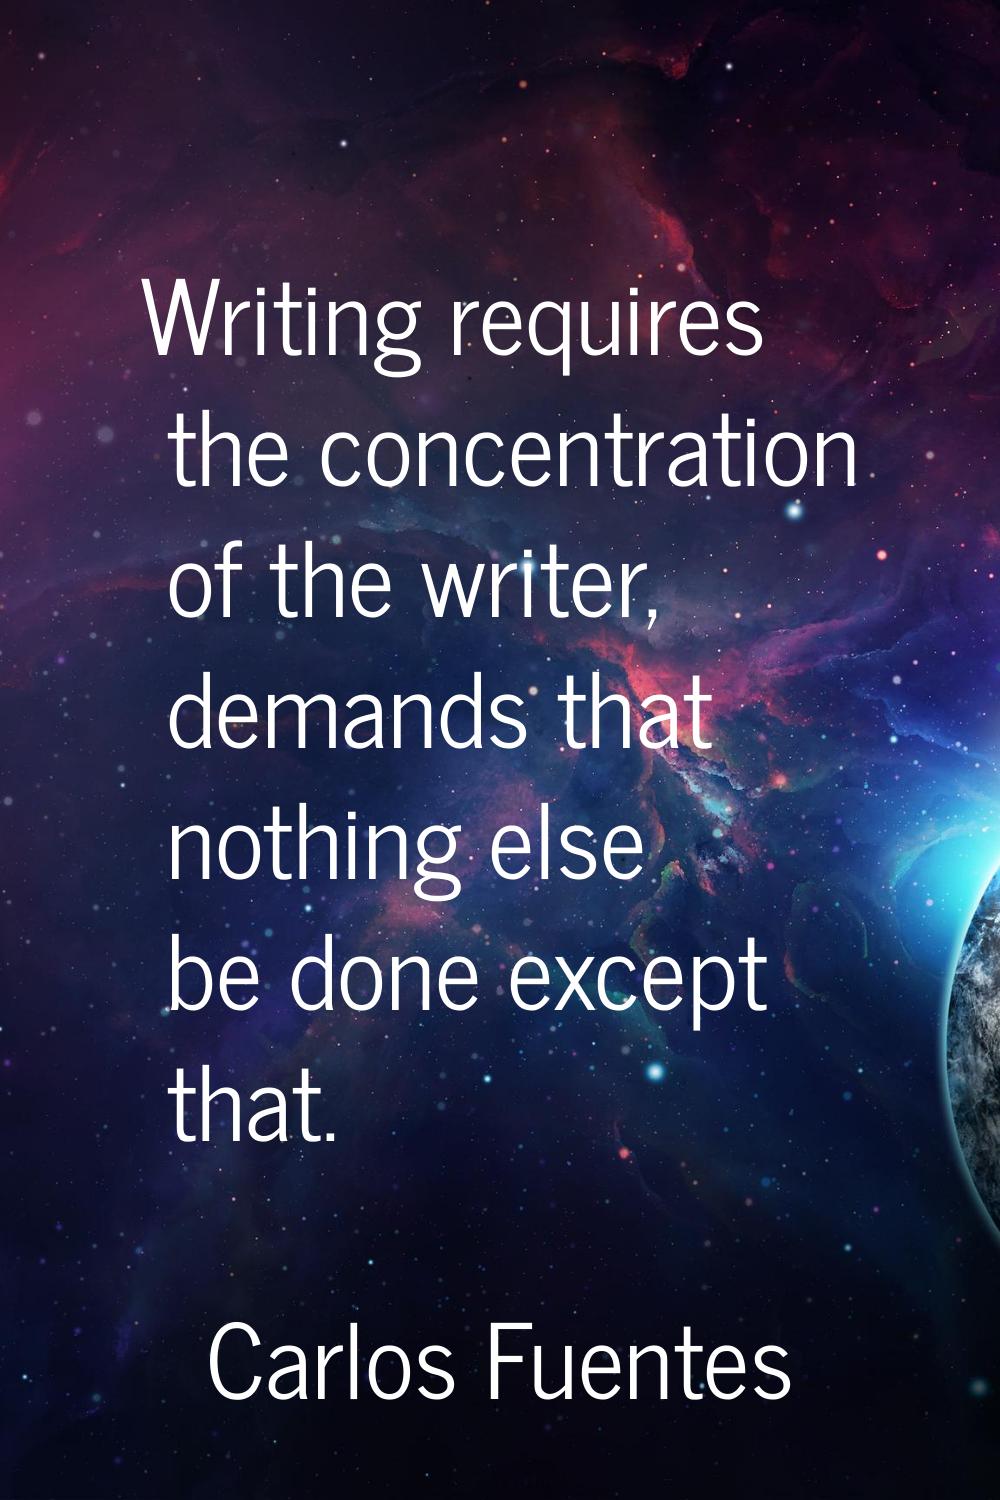 Writing requires the concentration of the writer, demands that nothing else be done except that.